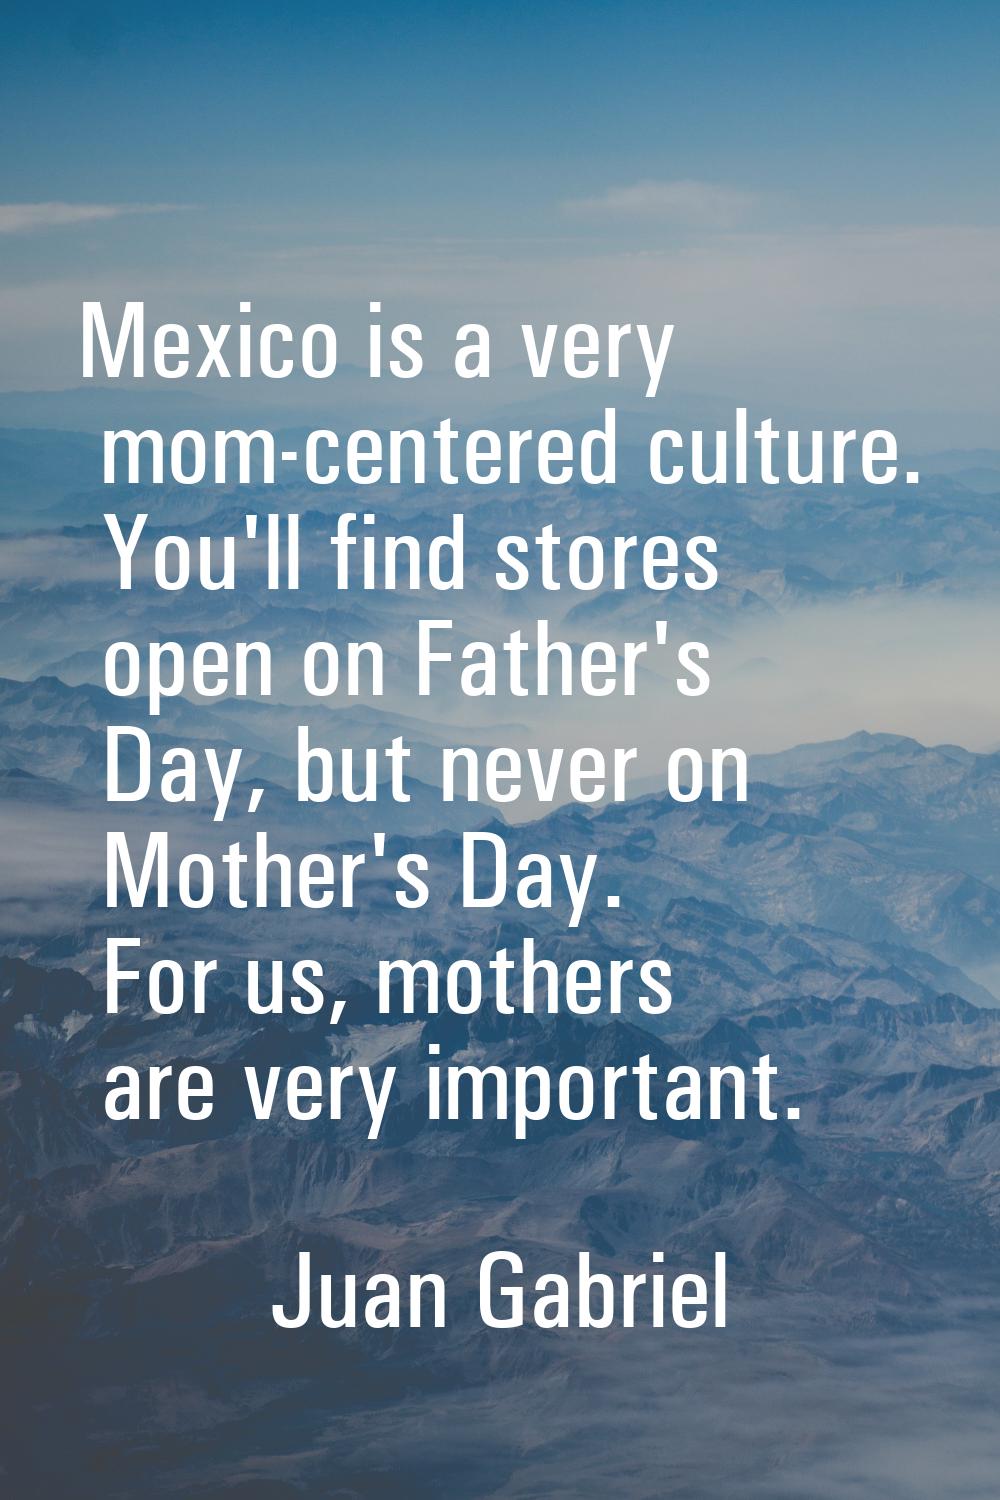 Mexico is a very mom-centered culture. You'll find stores open on Father's Day, but never on Mother